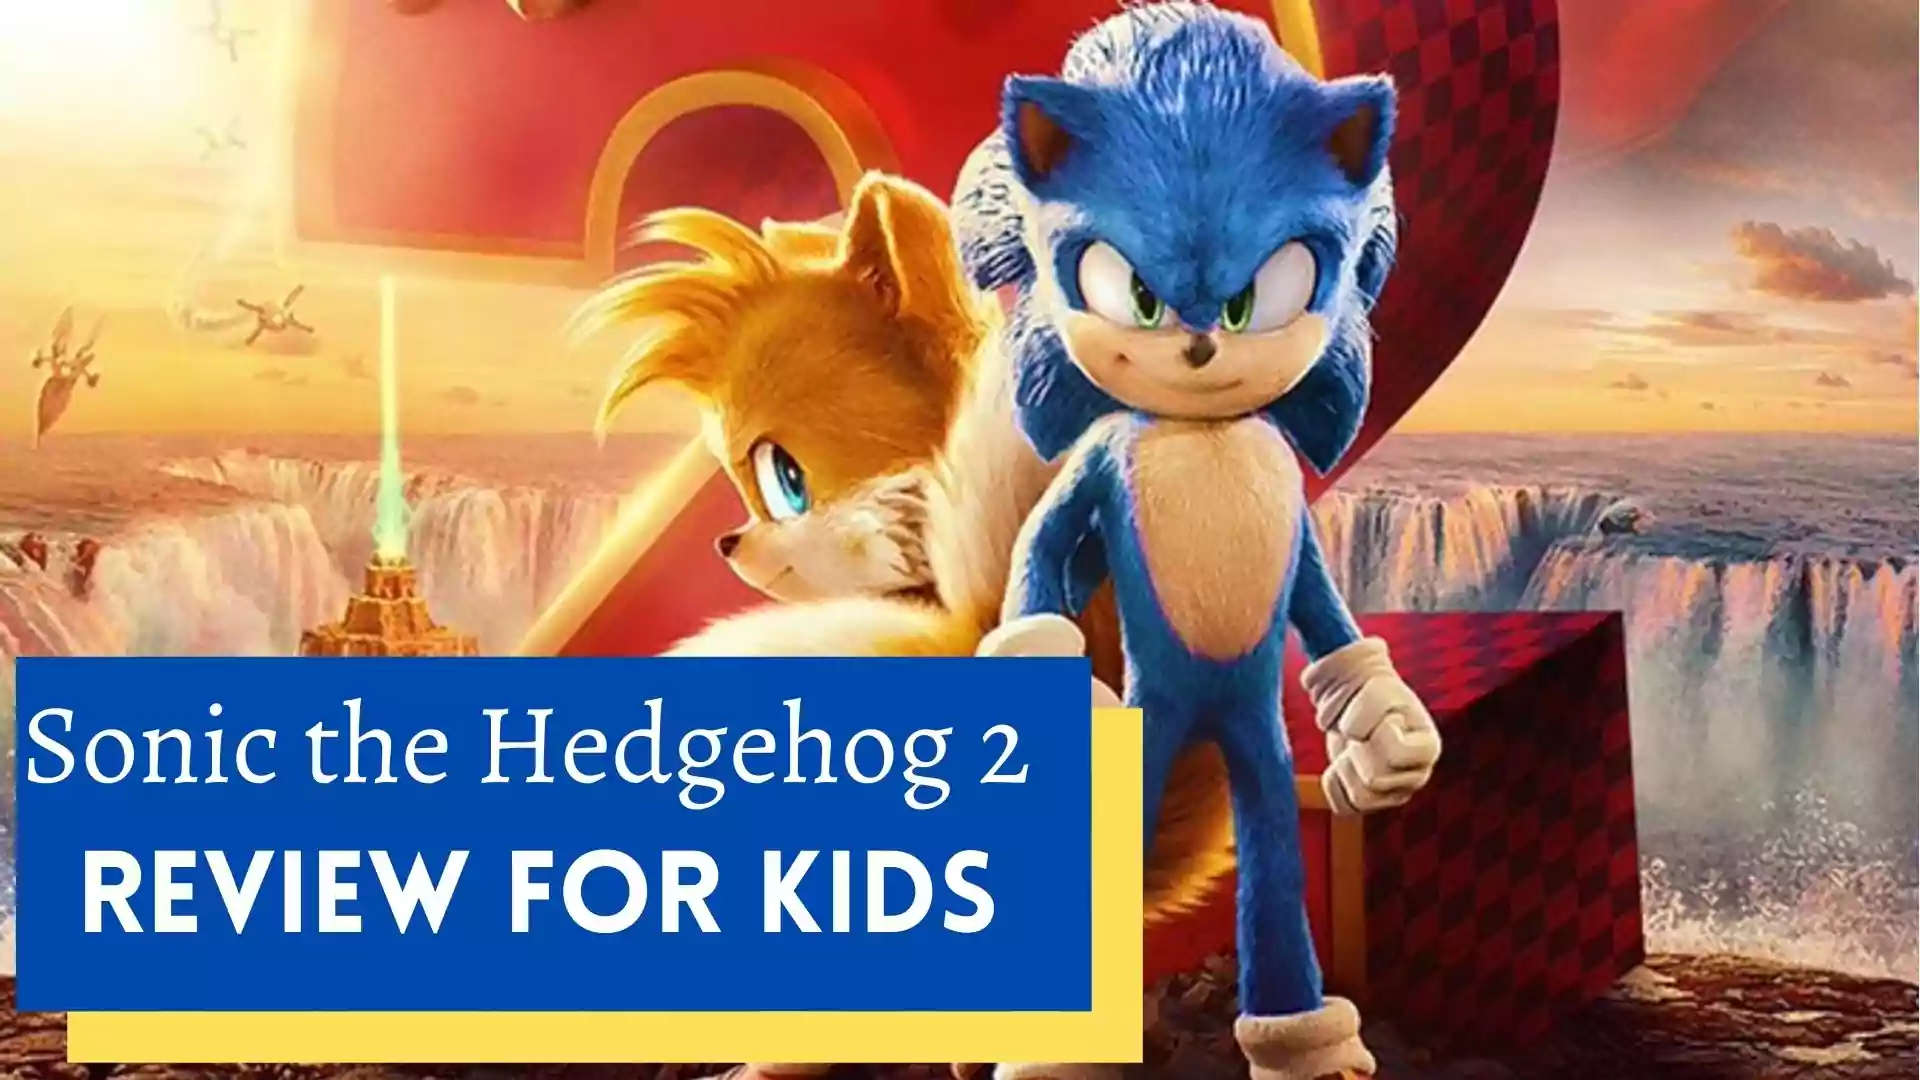 Sonic the Hedgehog 2 Movie Review For Kids. Sonic the Hedgehog 2 Review. Is Sonig the hedgehog 2 is appropriate for 4, 5, 6 year old?